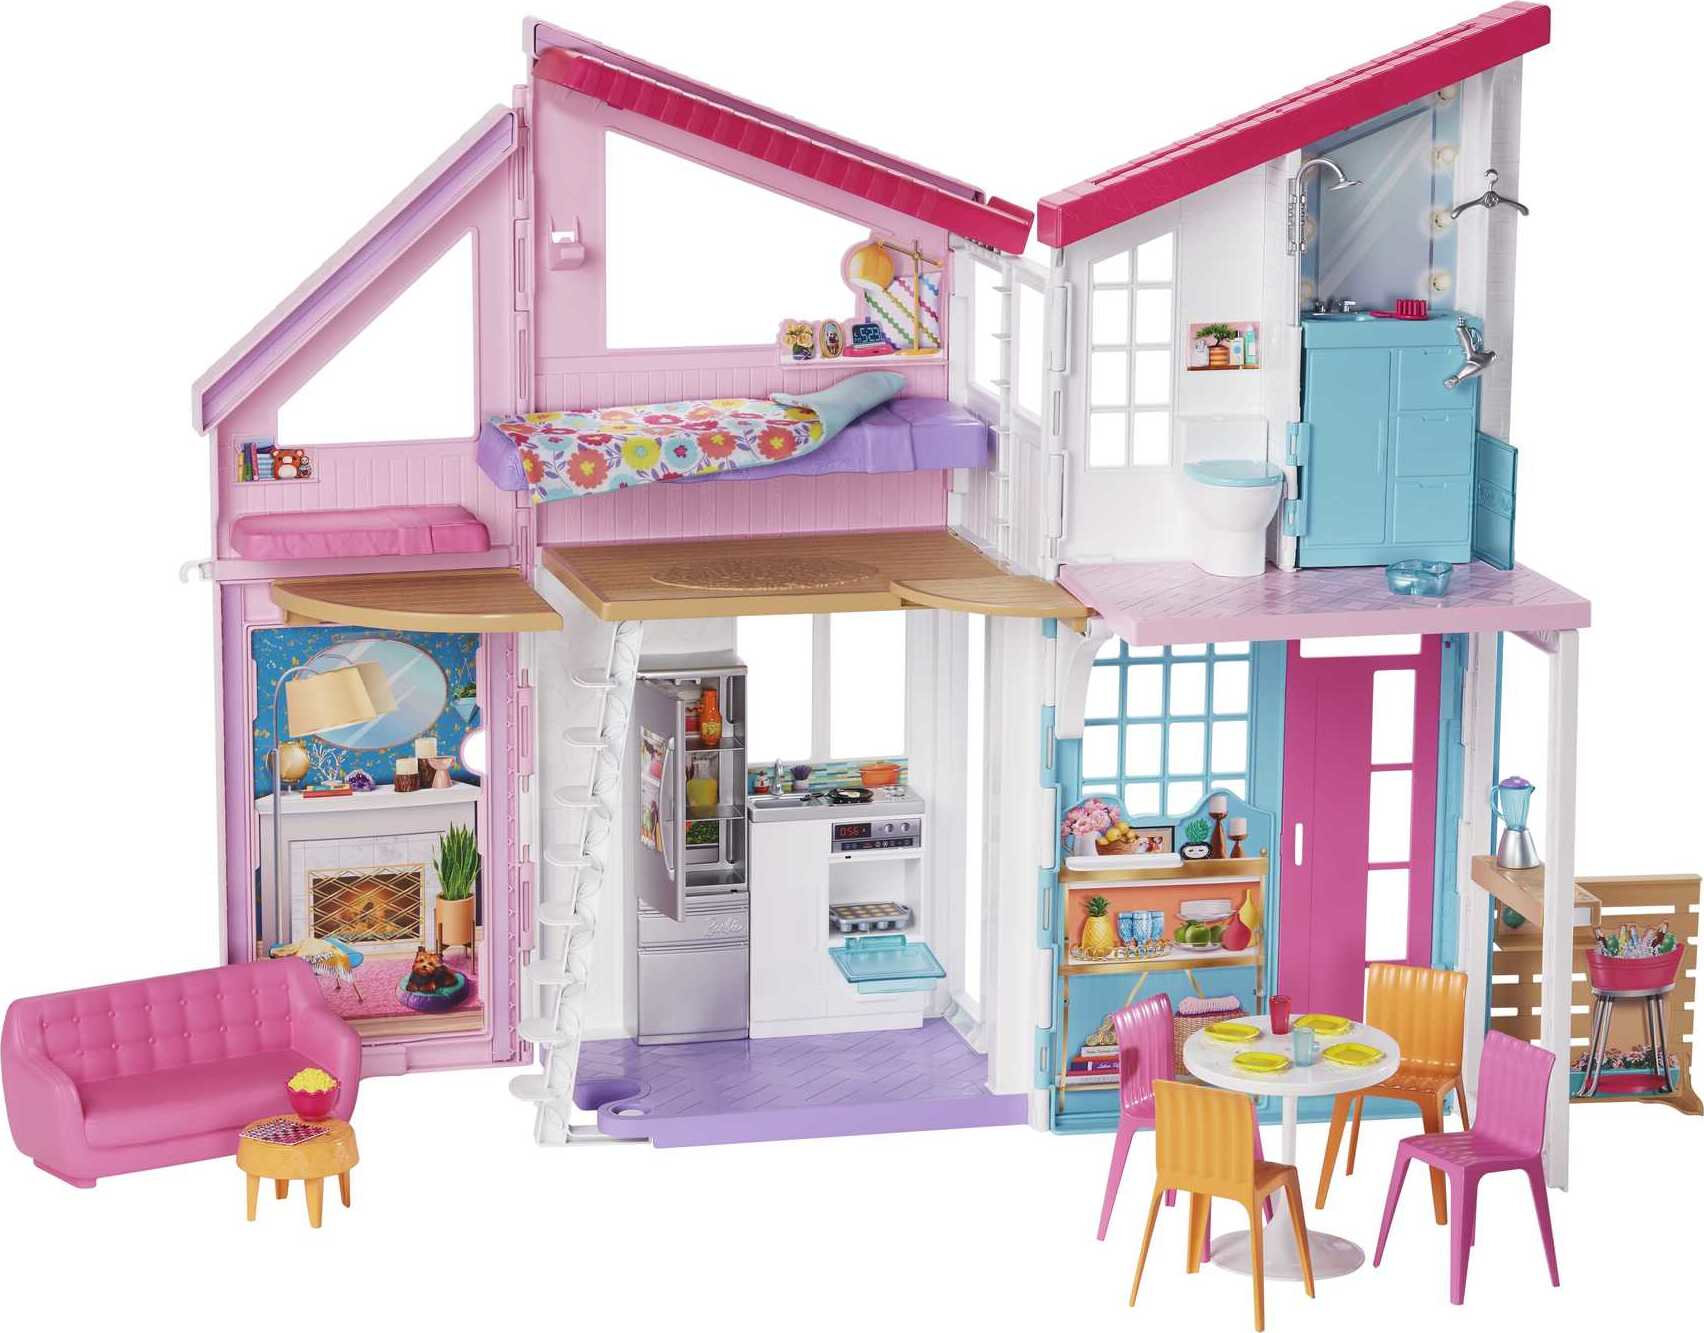 Barbie Malibu House Dollhouse Playset with 25+ Furniture and Accessories (6 Rooms) - image 1 of 8